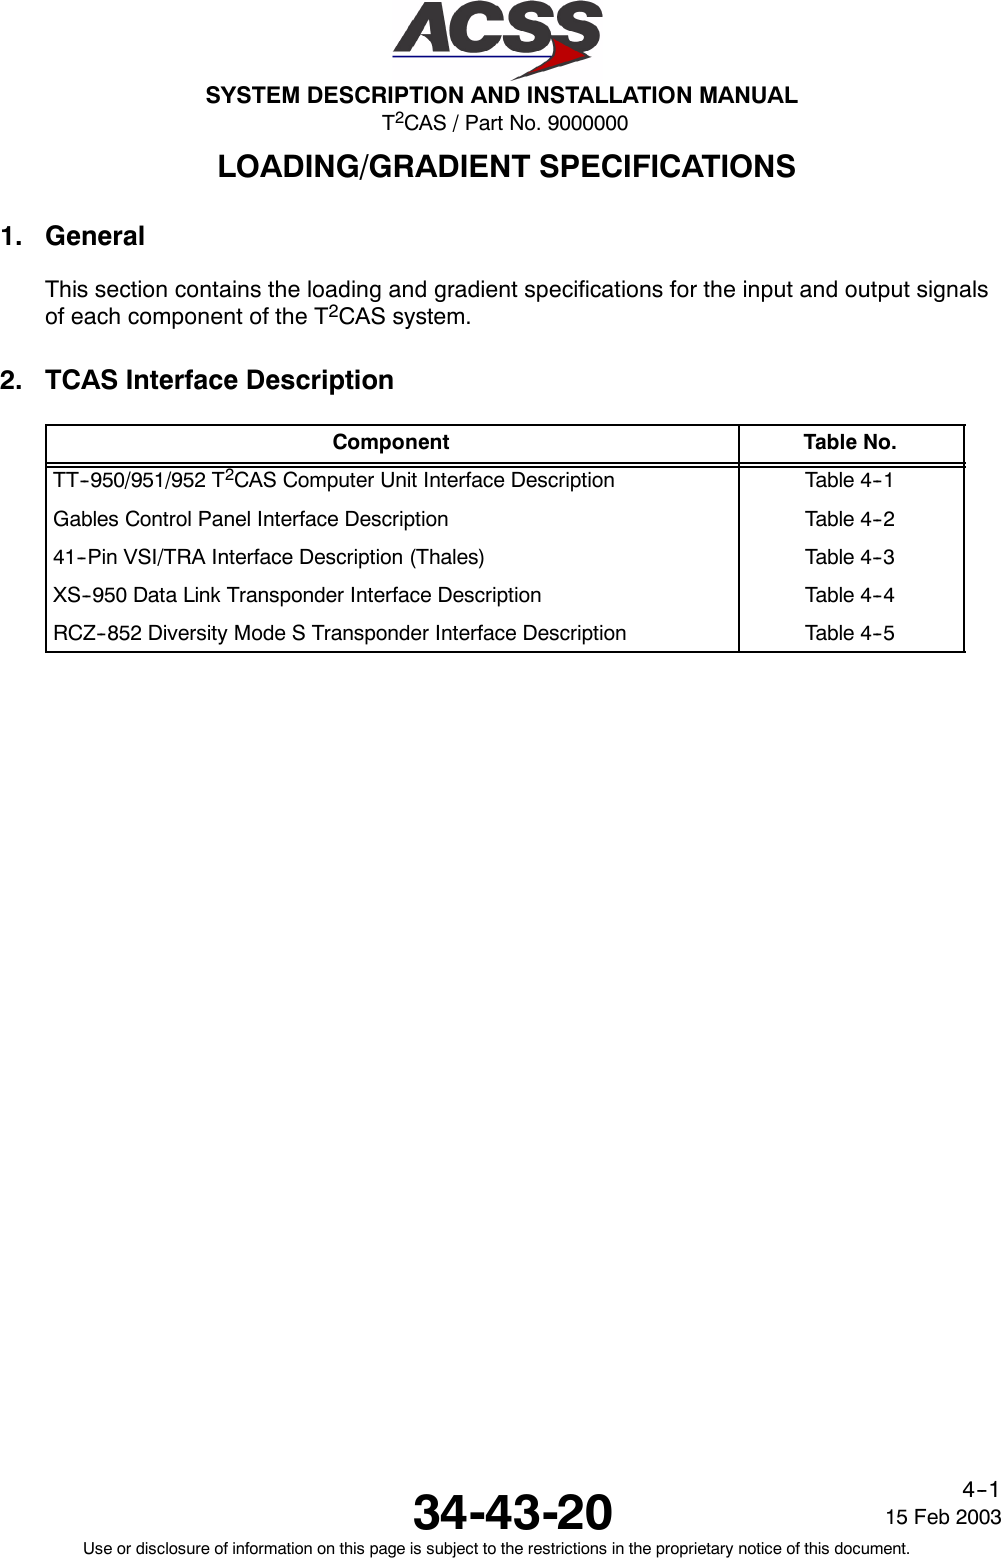 T2CAS / Part No. 9000000SYSTEM DESCRIPTION AND INSTALLATION MANUAL34-43-20 15 Feb 2003Use or disclosure of information on this page is subject to the restrictions in the proprietary notice of this document.4--1LOADING/GRADIENT SPECIFICATIONS1. GeneralThis section contains the loading and gradient specifications for the input and output signalsof each component of the T2CAS system.2. TCAS Interface DescriptionComponent Table No.TT--950/951/952 T2CAS Computer Unit Interface Description Table 4--1Gables Control Panel Interface Description Table 4--241--Pin VSI/TRA Interface Description (Thales) Table 4--3XS--950 Data Link Transponder Interface Description Table 4--4RCZ--852 Diversity Mode S Transponder Interface Description Table 4--5